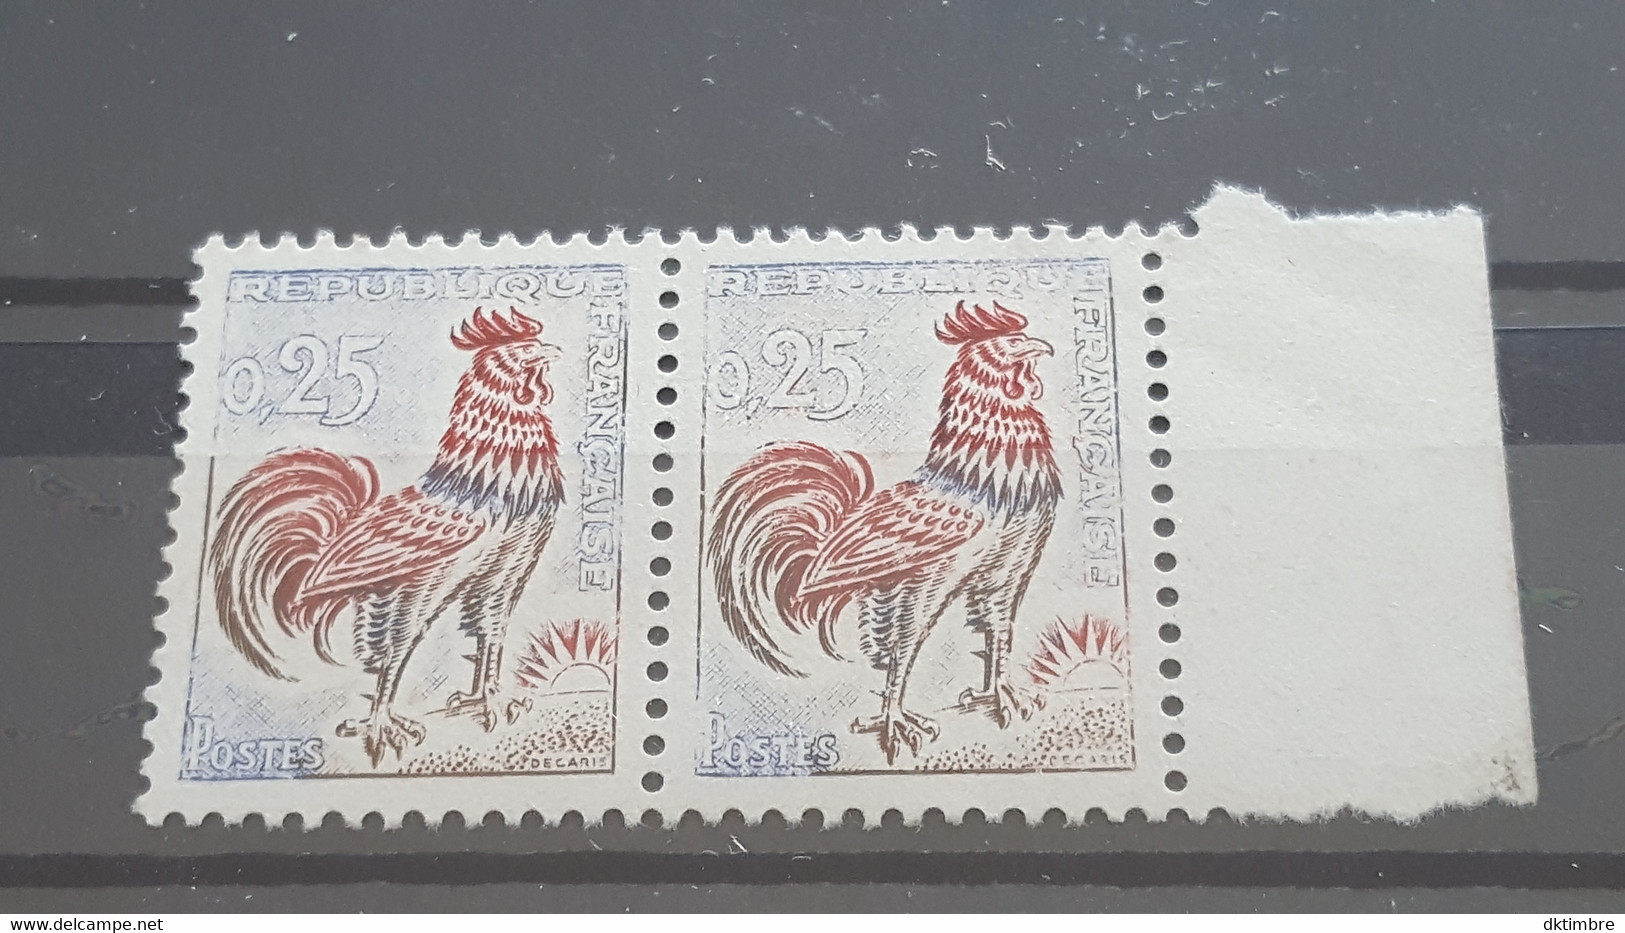 LOT550136  TIMBRE DE FRANCE NEUF** LUXE VARIETE N°1331 IMPRESSION DEPOUILLE - Collections